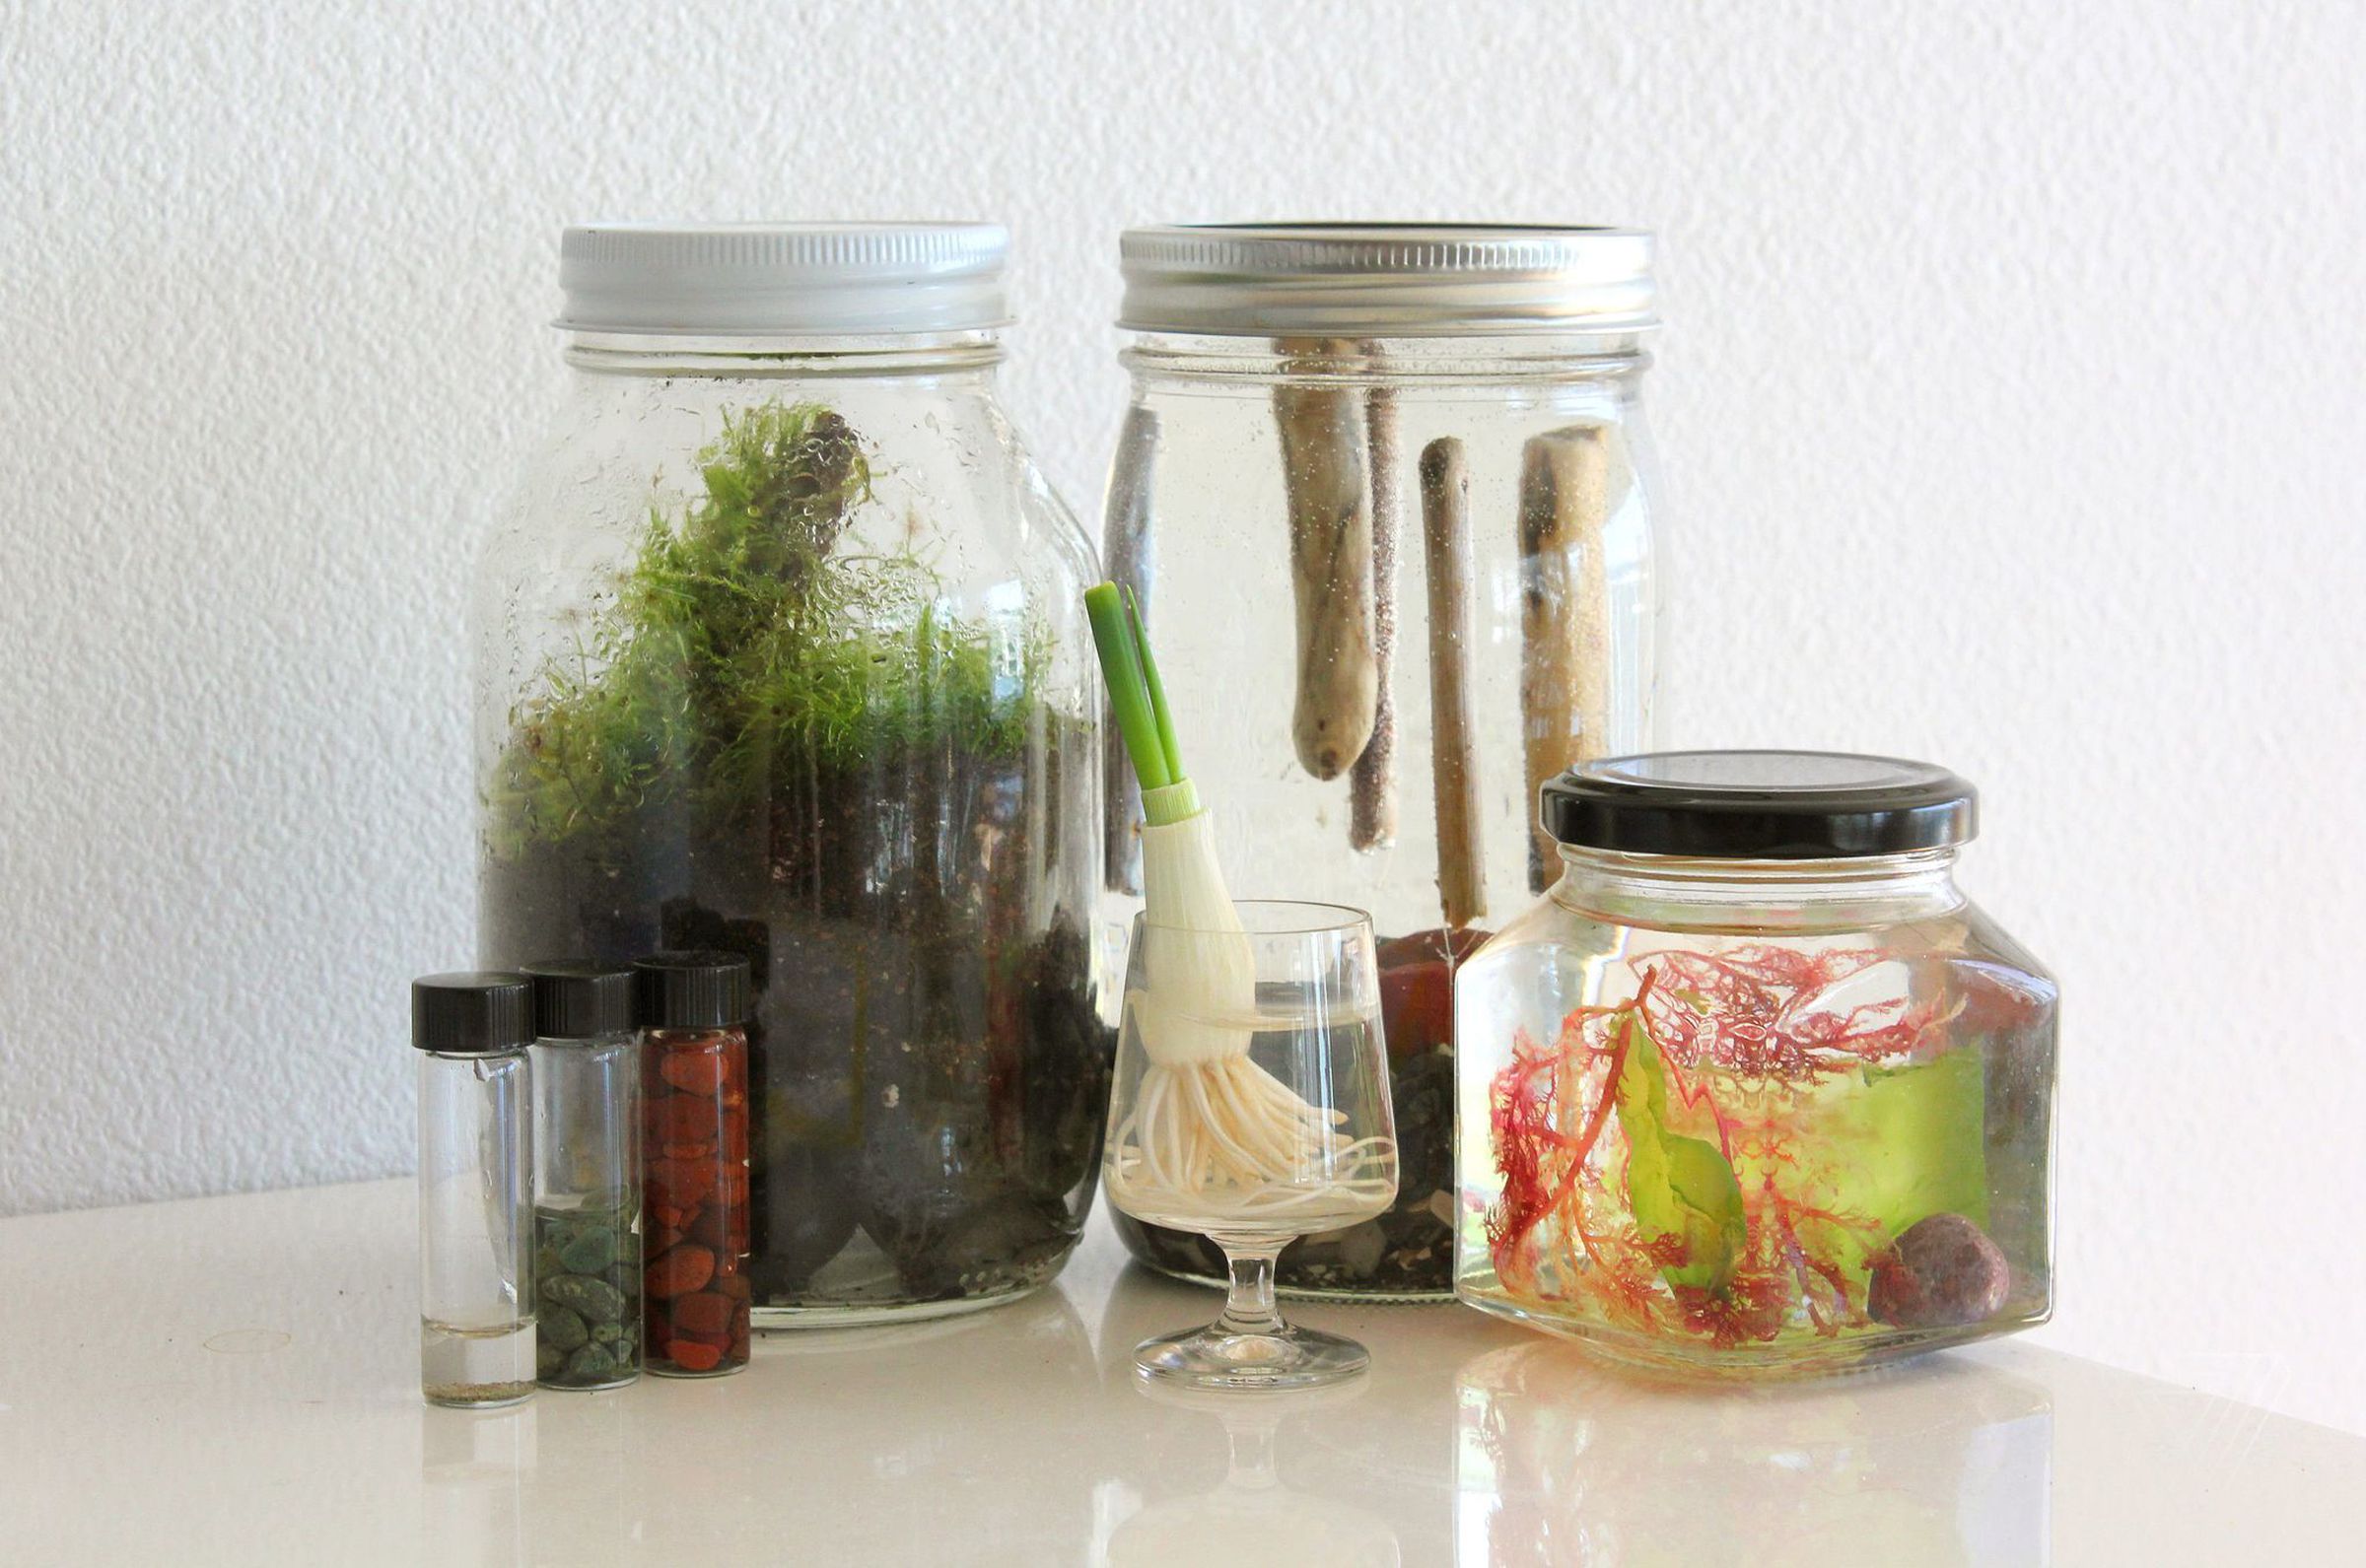 The idea is simple. You take a thing, and you put it in a jar.